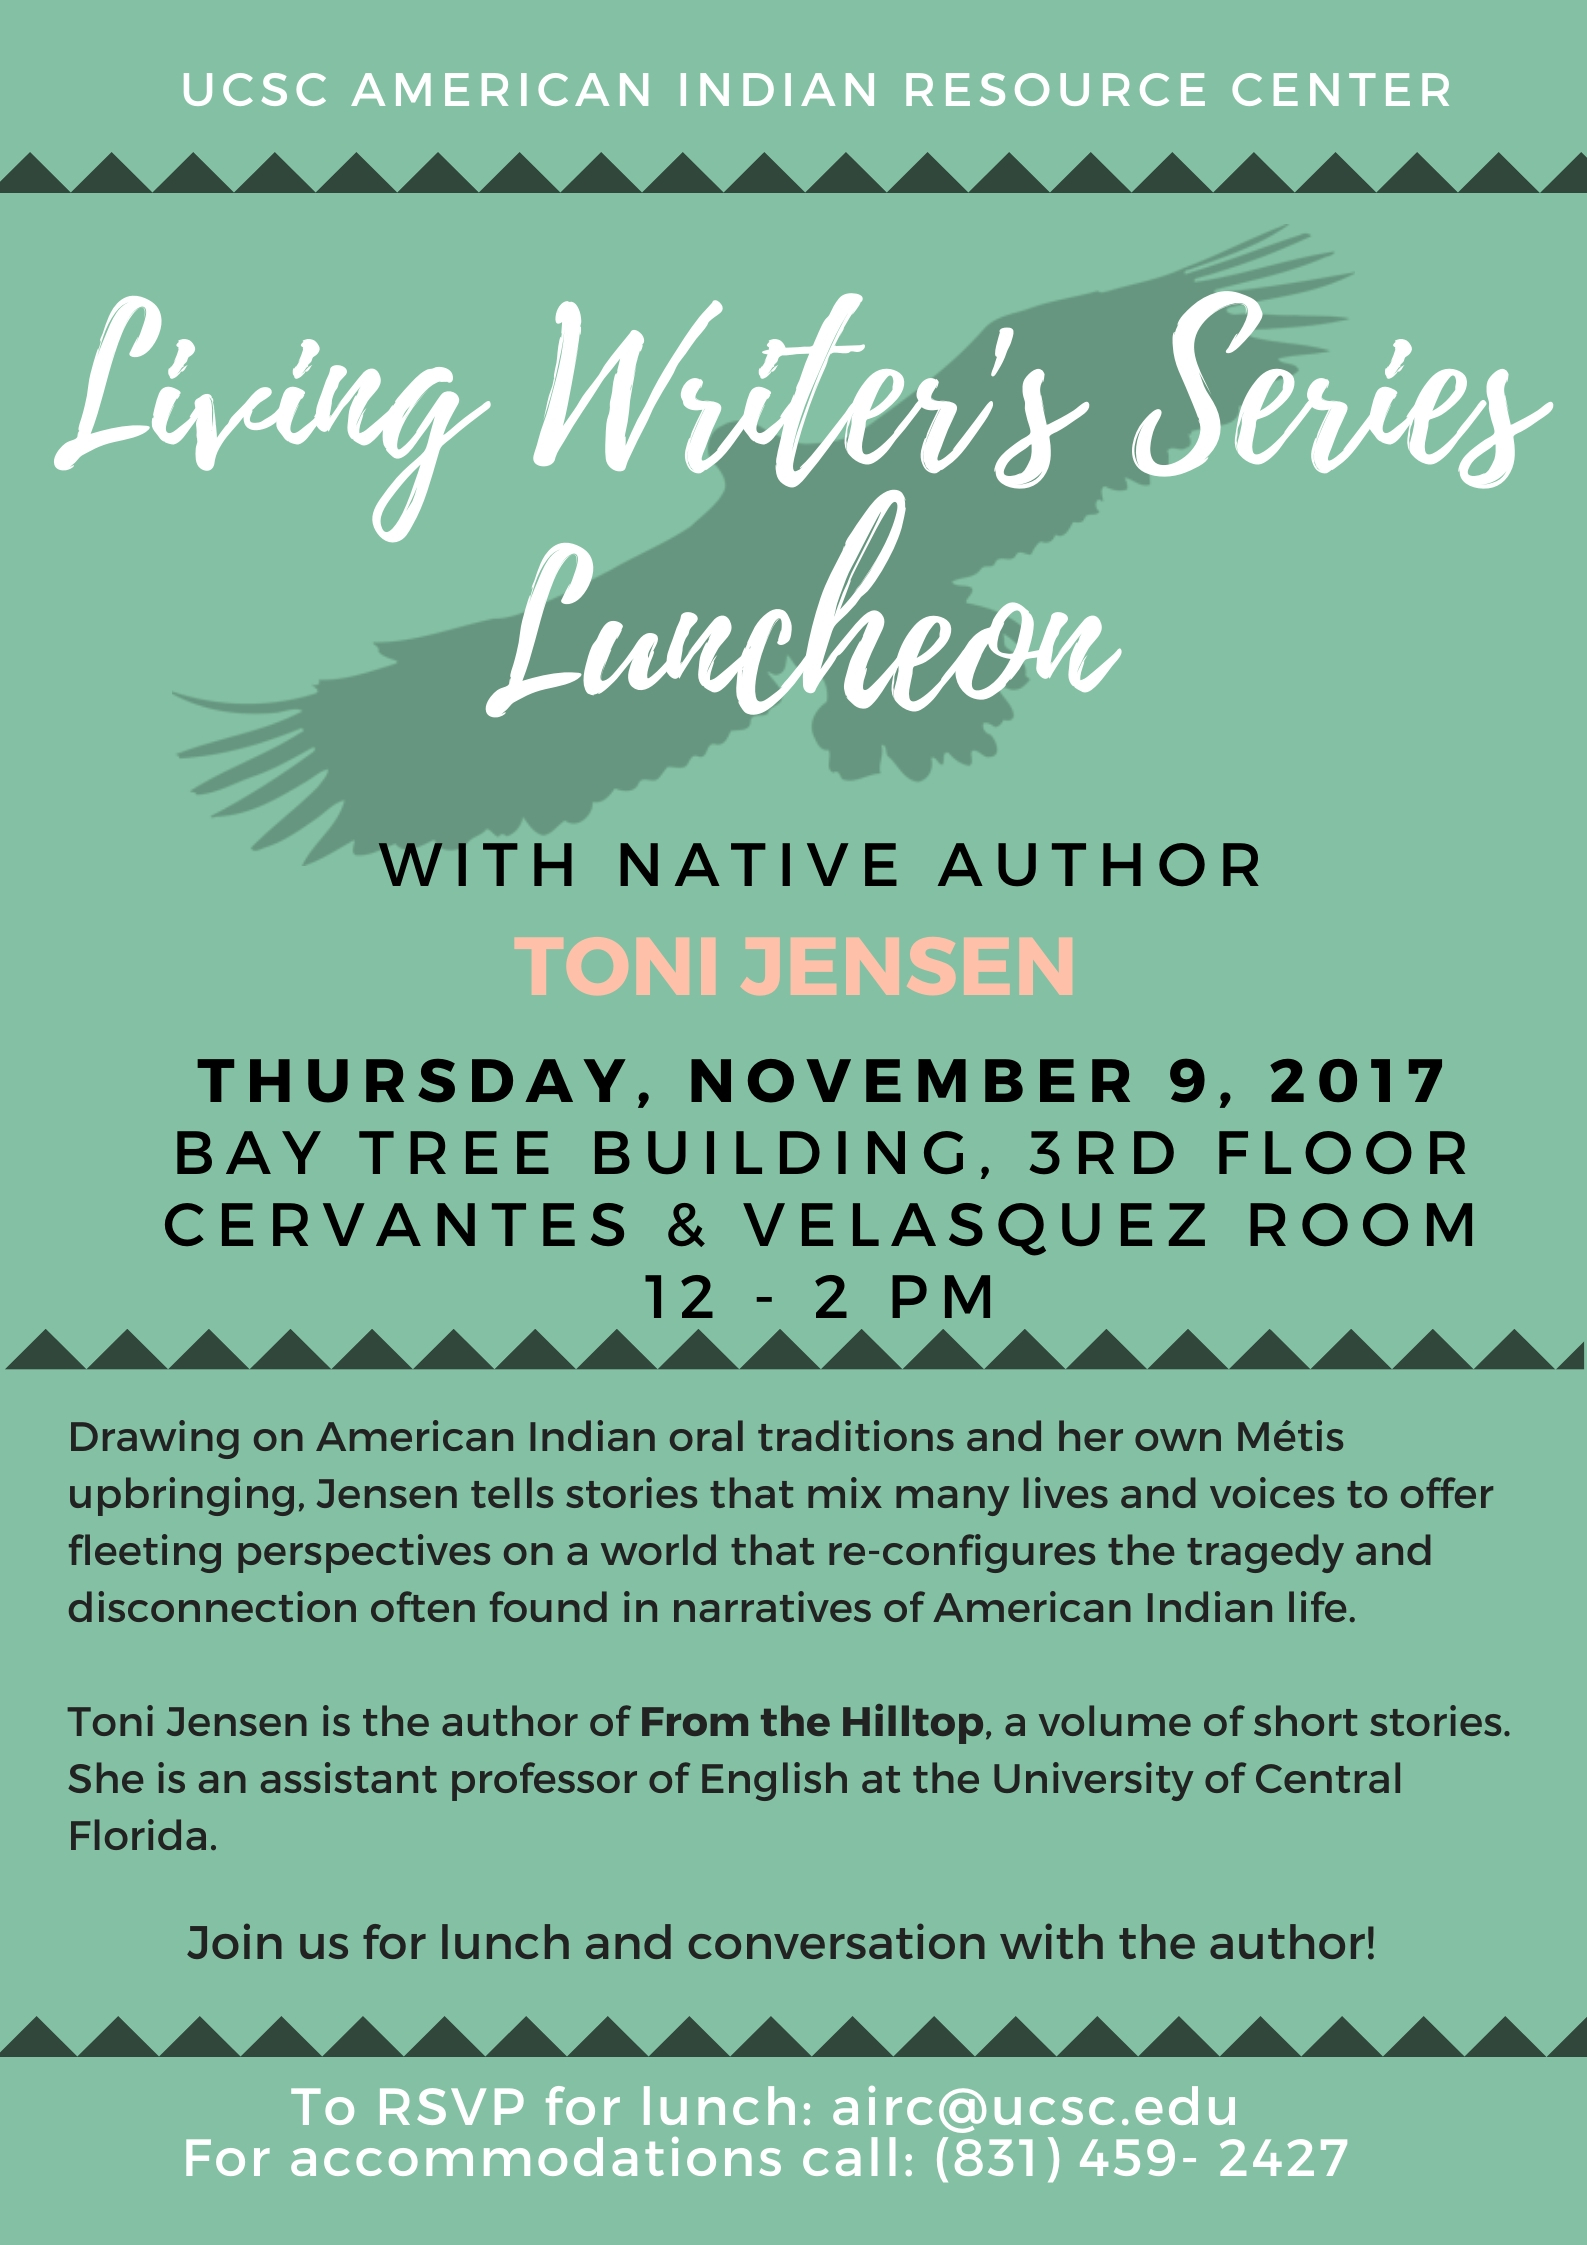 Living Writer's Series Luncheon with Native author Toni Jensen